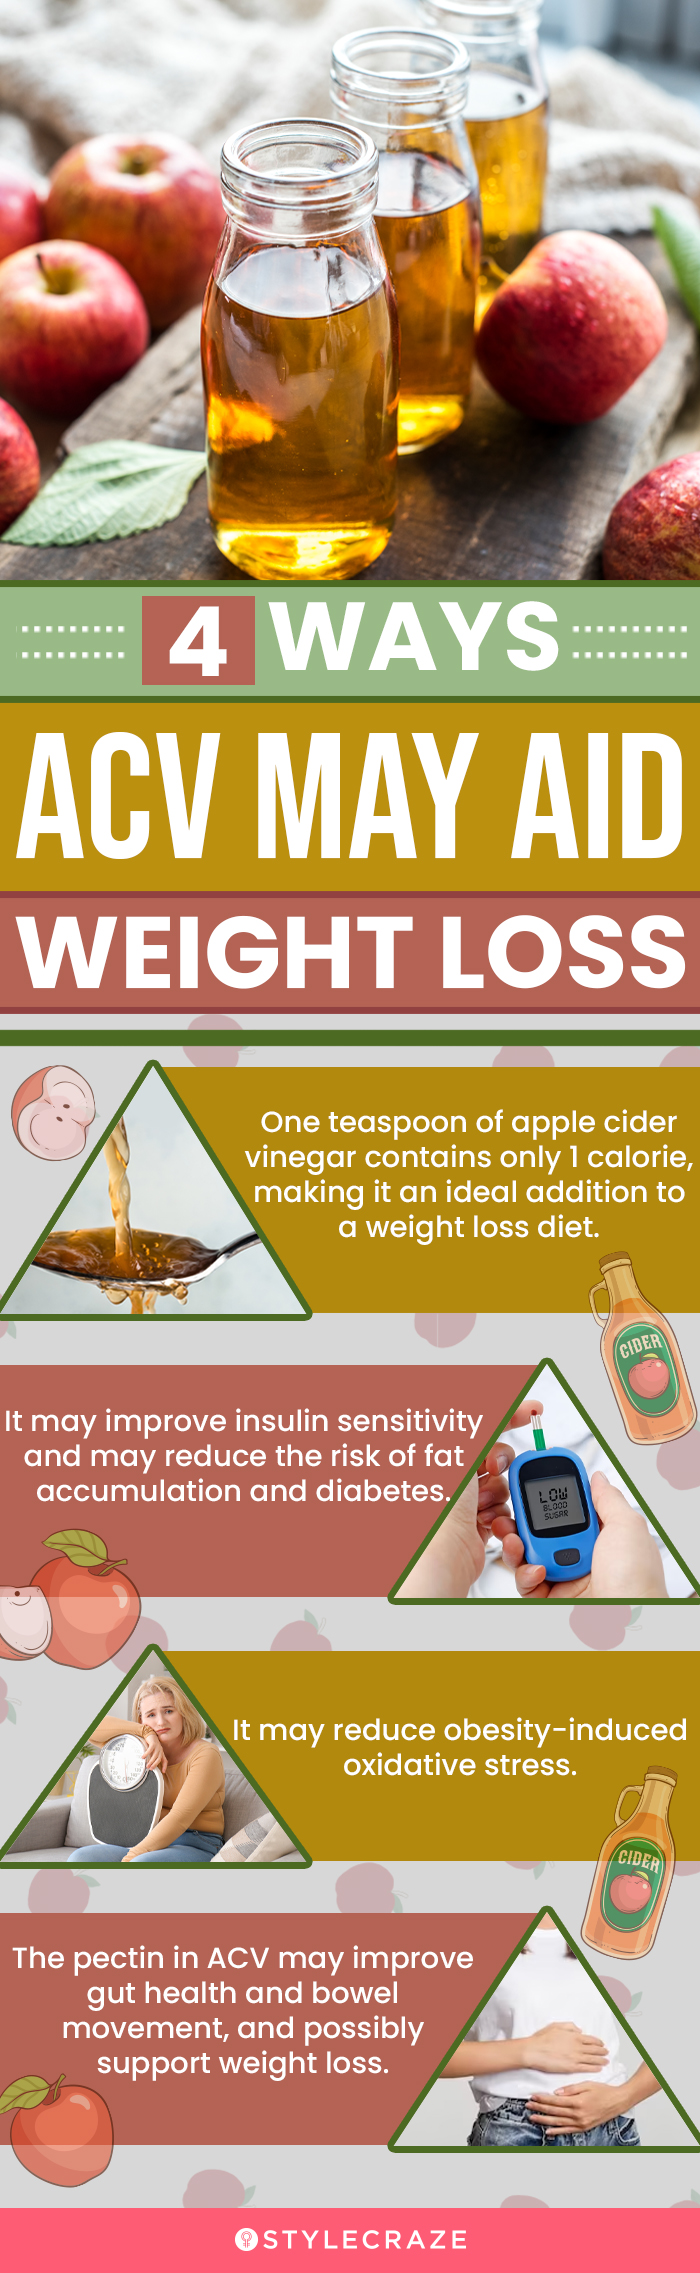 4 ways acv aids in weight loss (infographic)